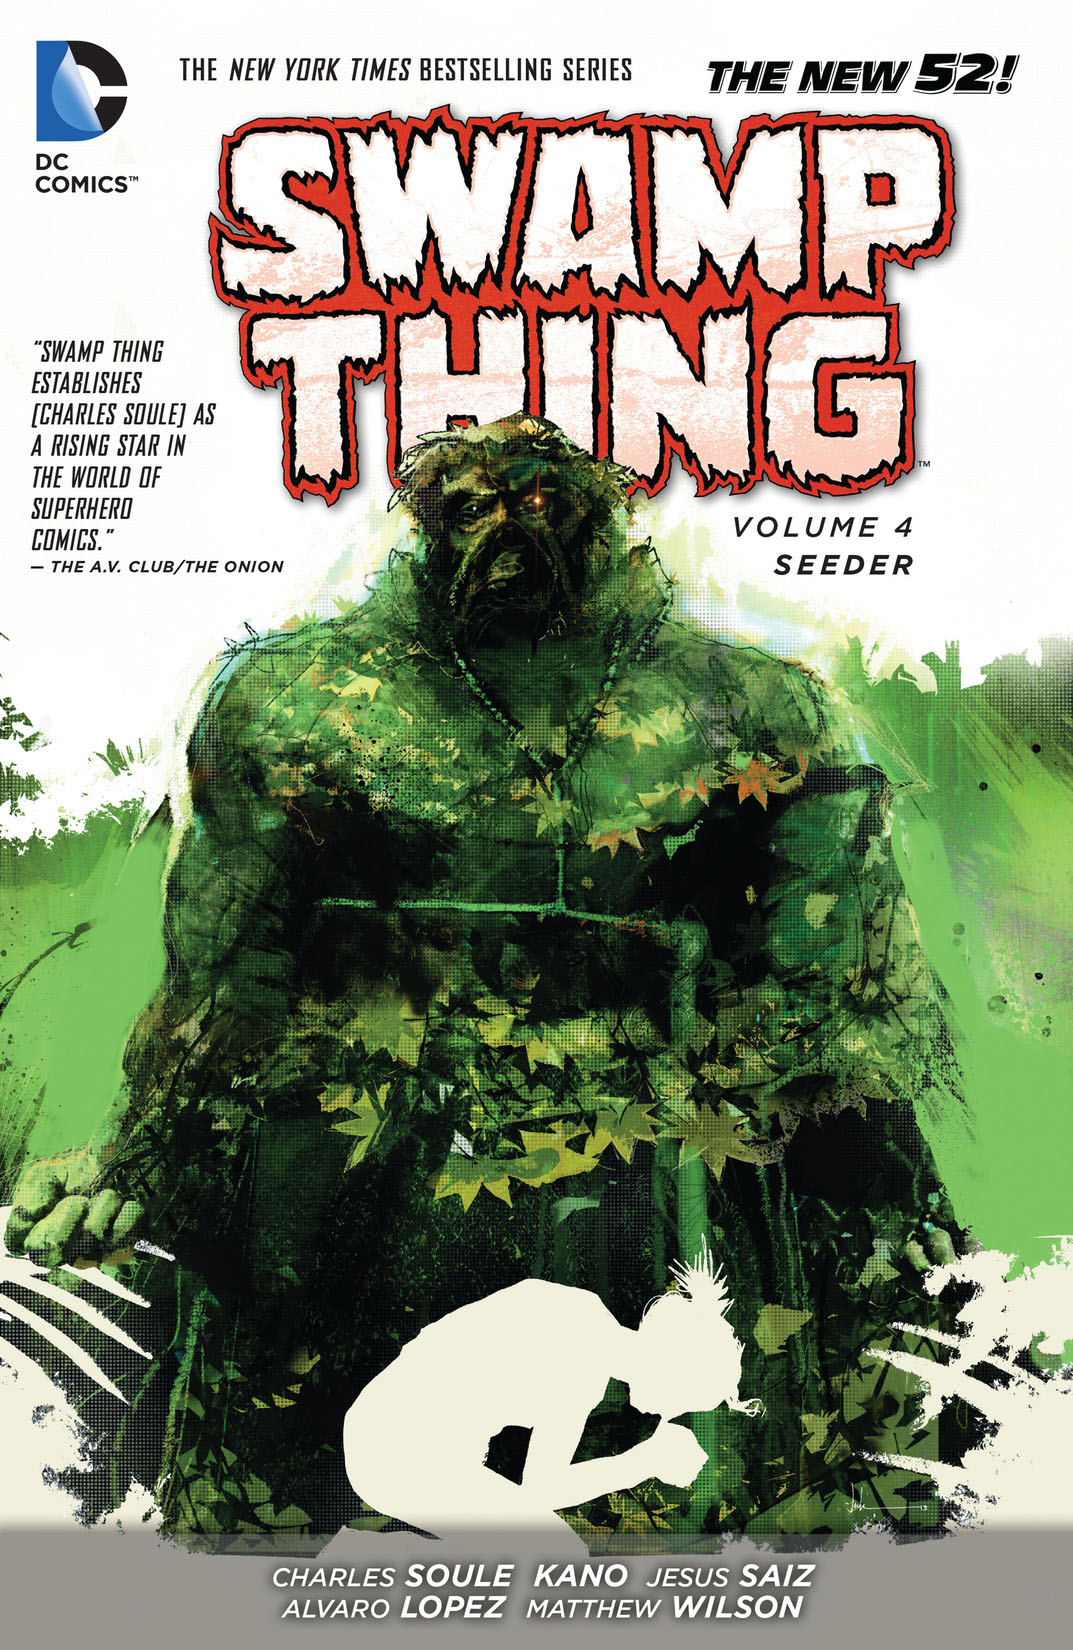 Swamp Thing Vol. 4: Seeder preview images